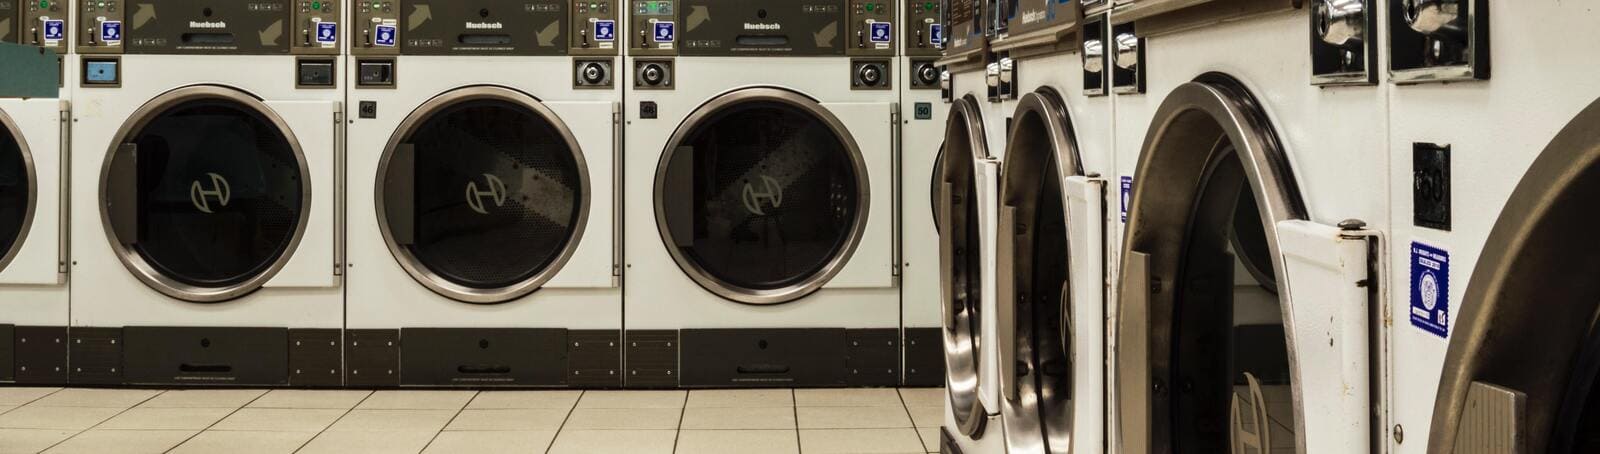 Don’t Let Dirty Clothes Ruin Your Fishing Trip: How Laundry Services Can Help